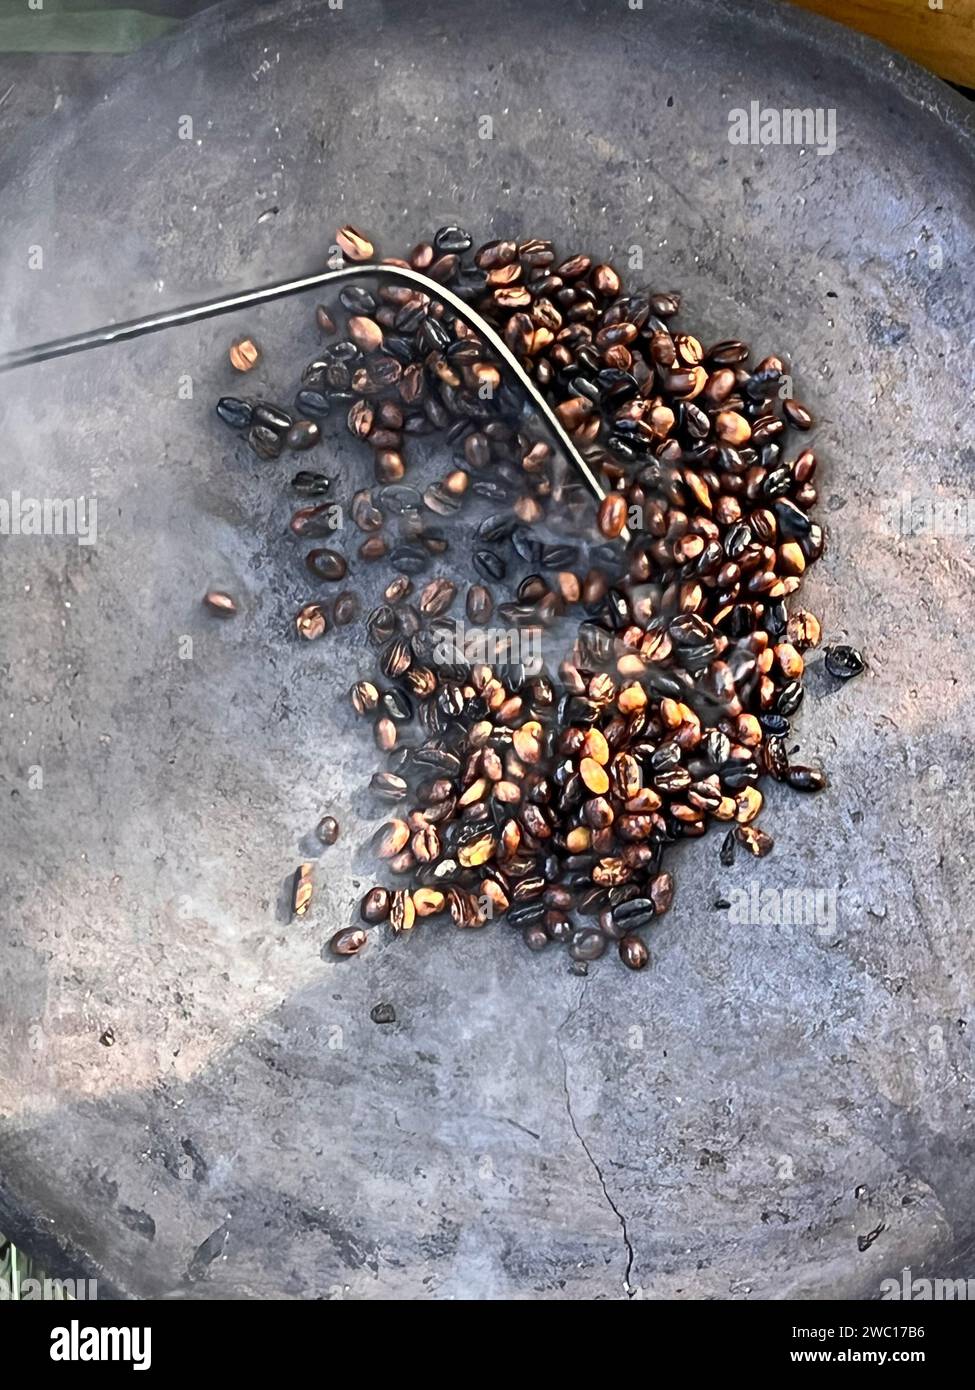 coffee beans being roasted by hand in the traditional way on a wood-fired stove seen from above through the smoke Stock Photo